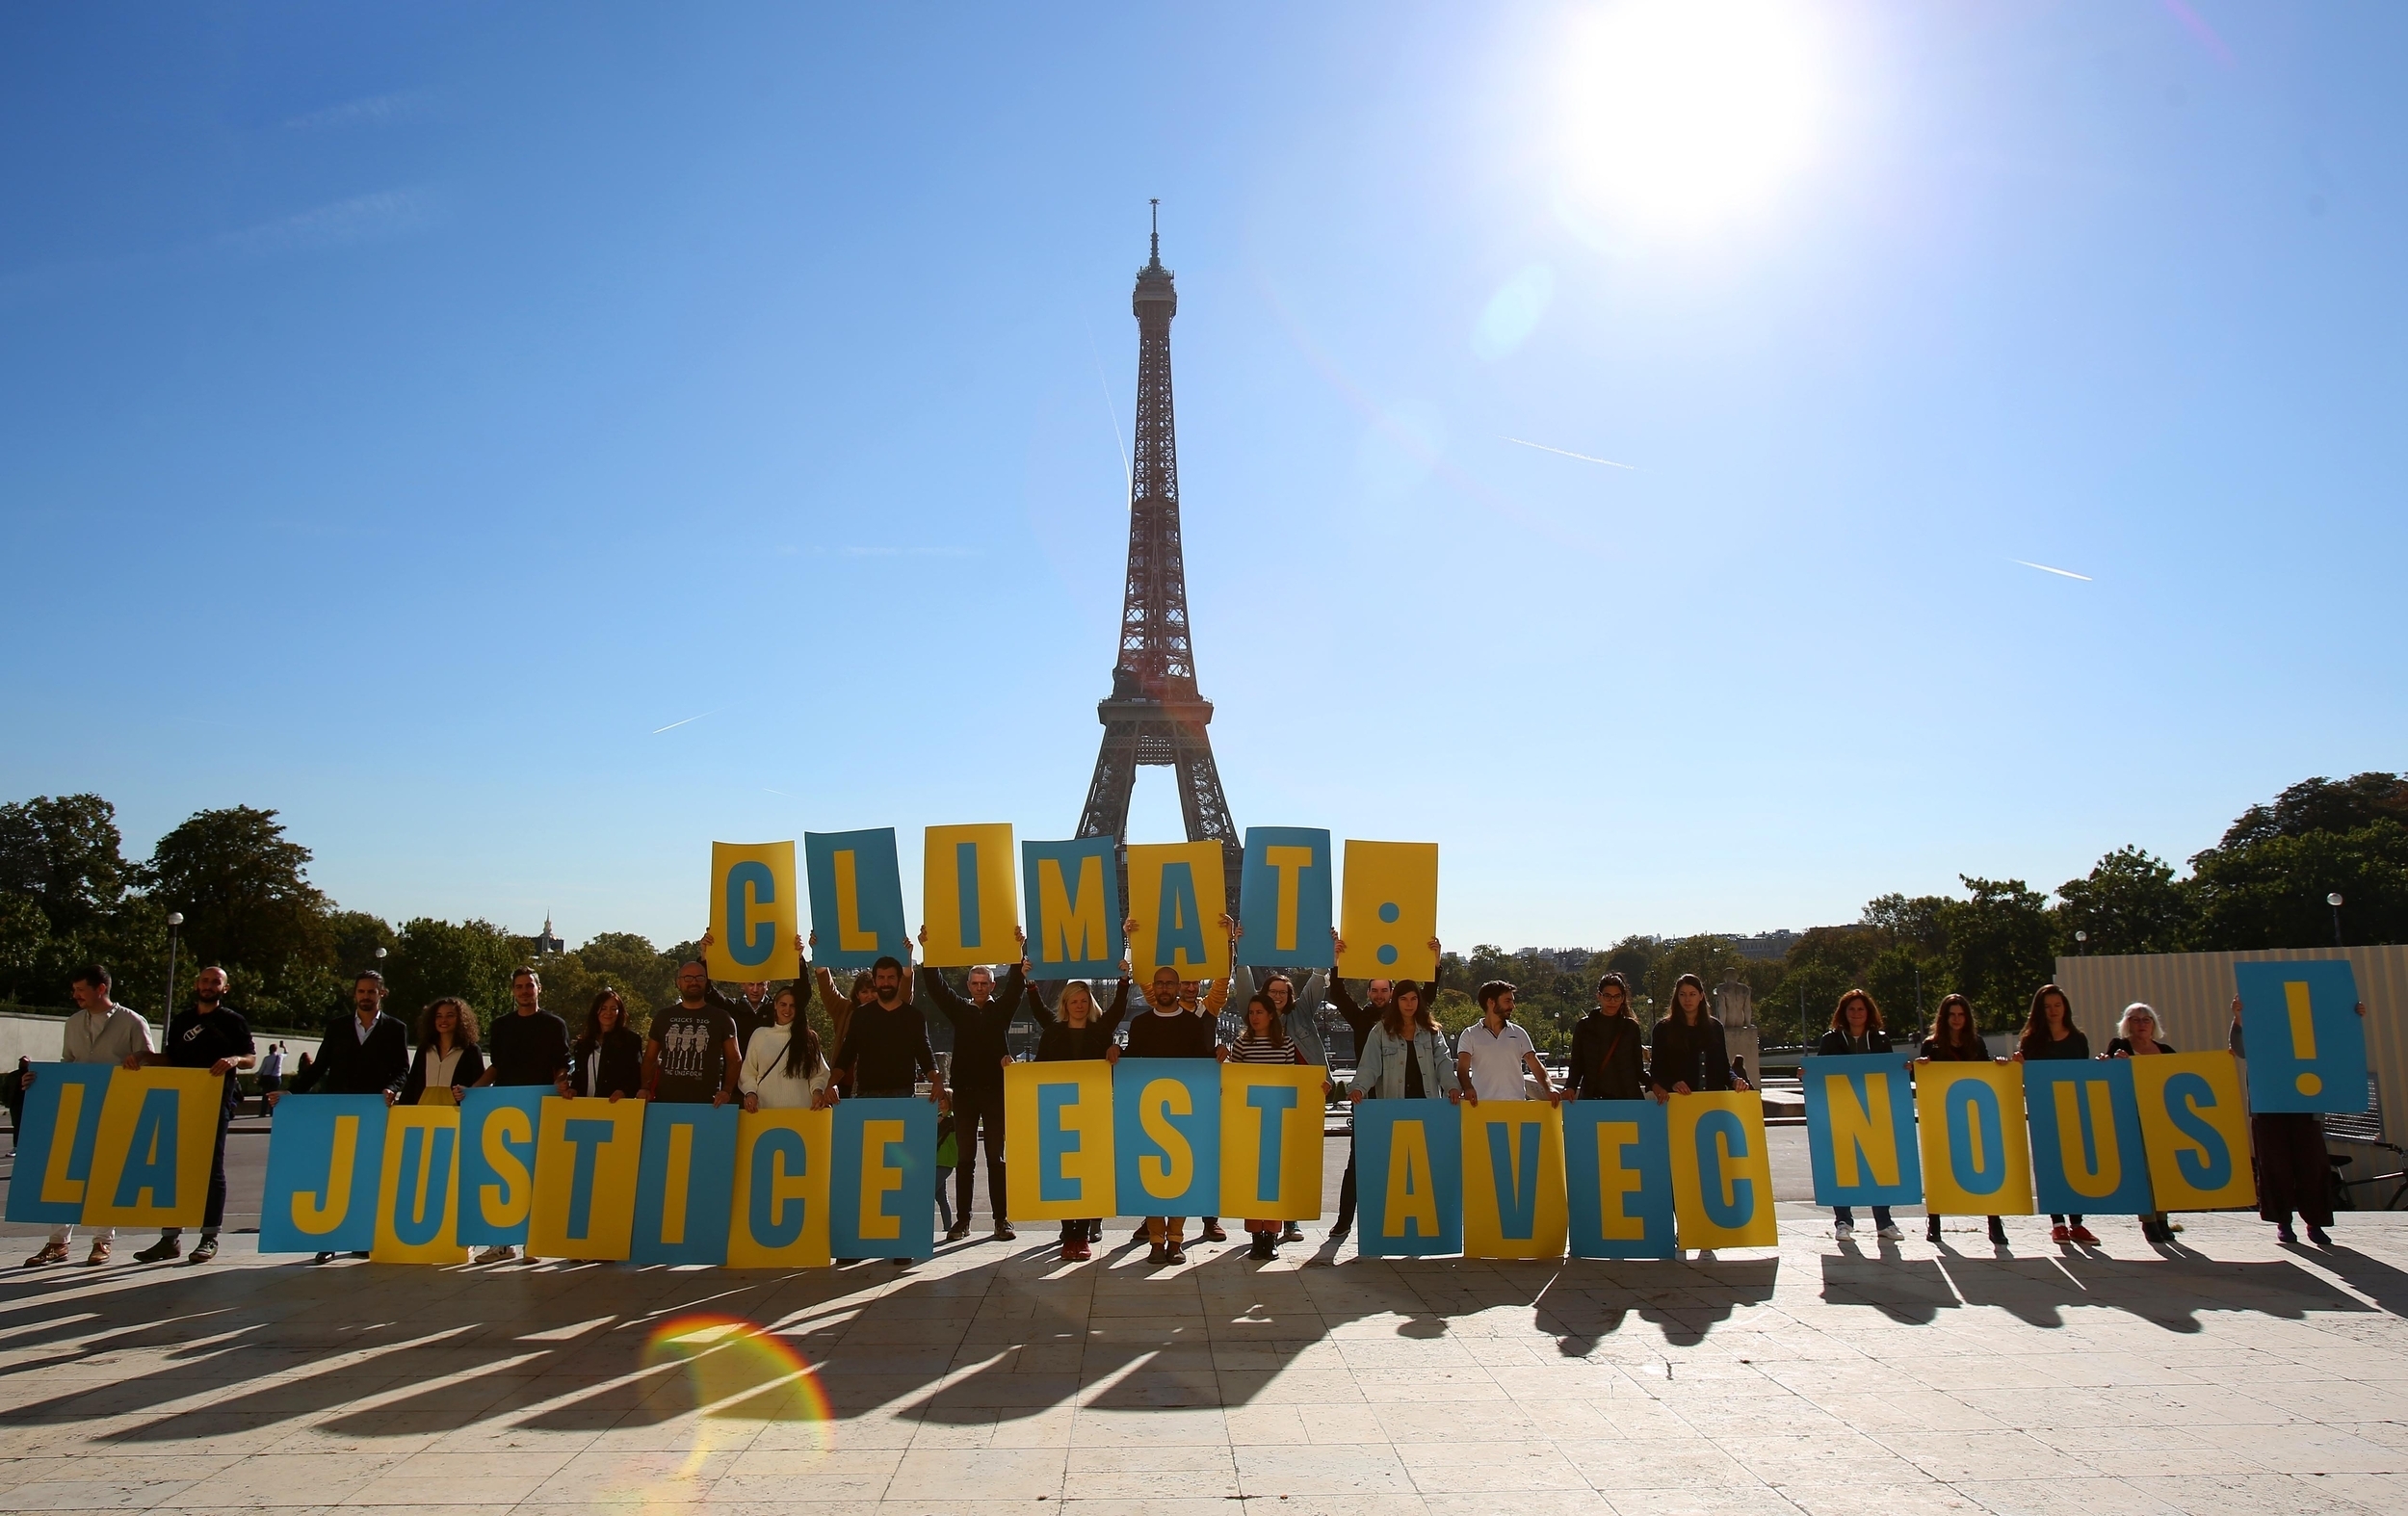 A large group of people in front of the Eiffel Tower hold up blue and yellow signs spelling out 'Climat: la justice est avec nous'